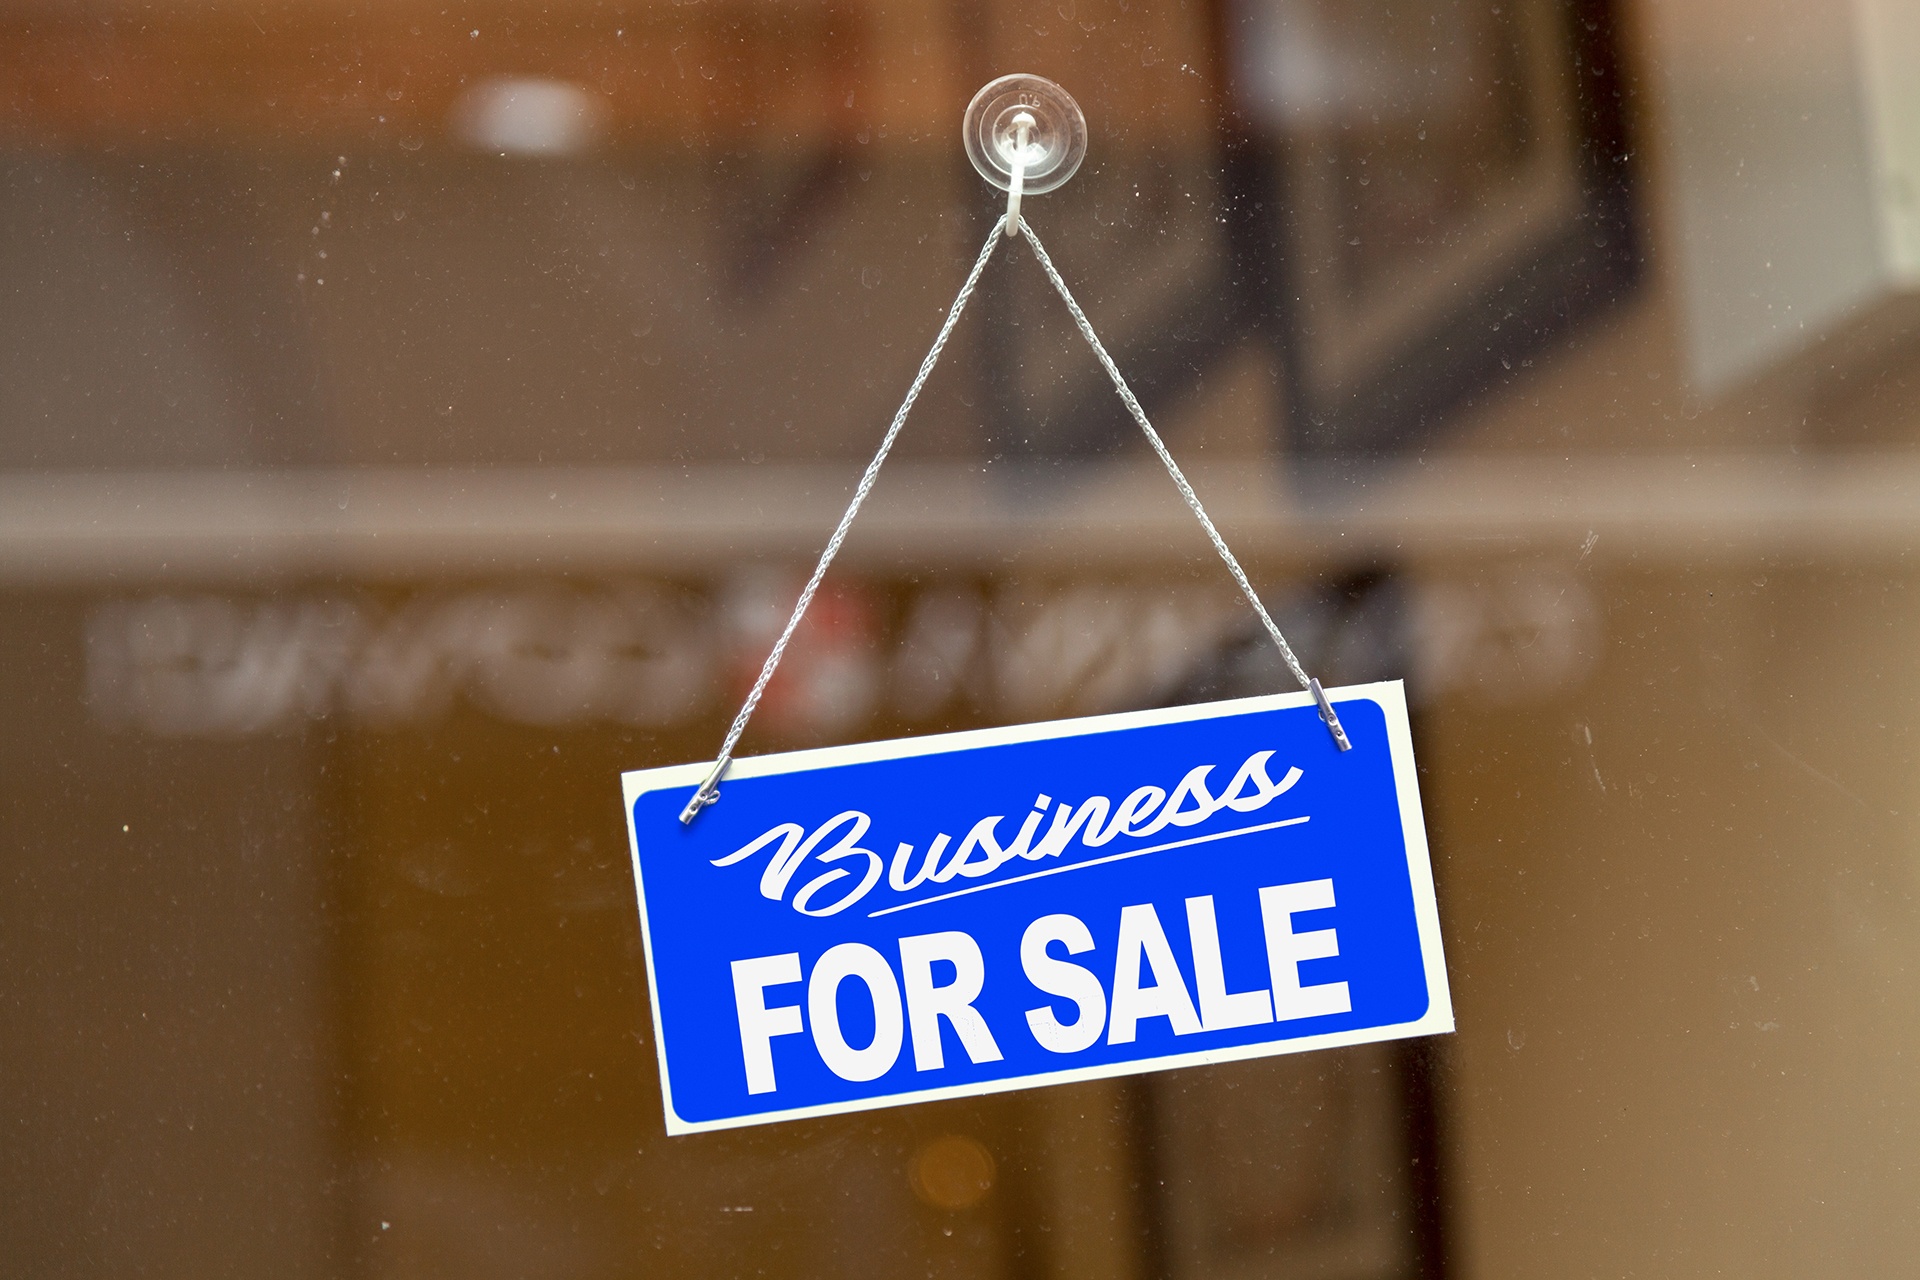 LCG - business for sale sign in the window